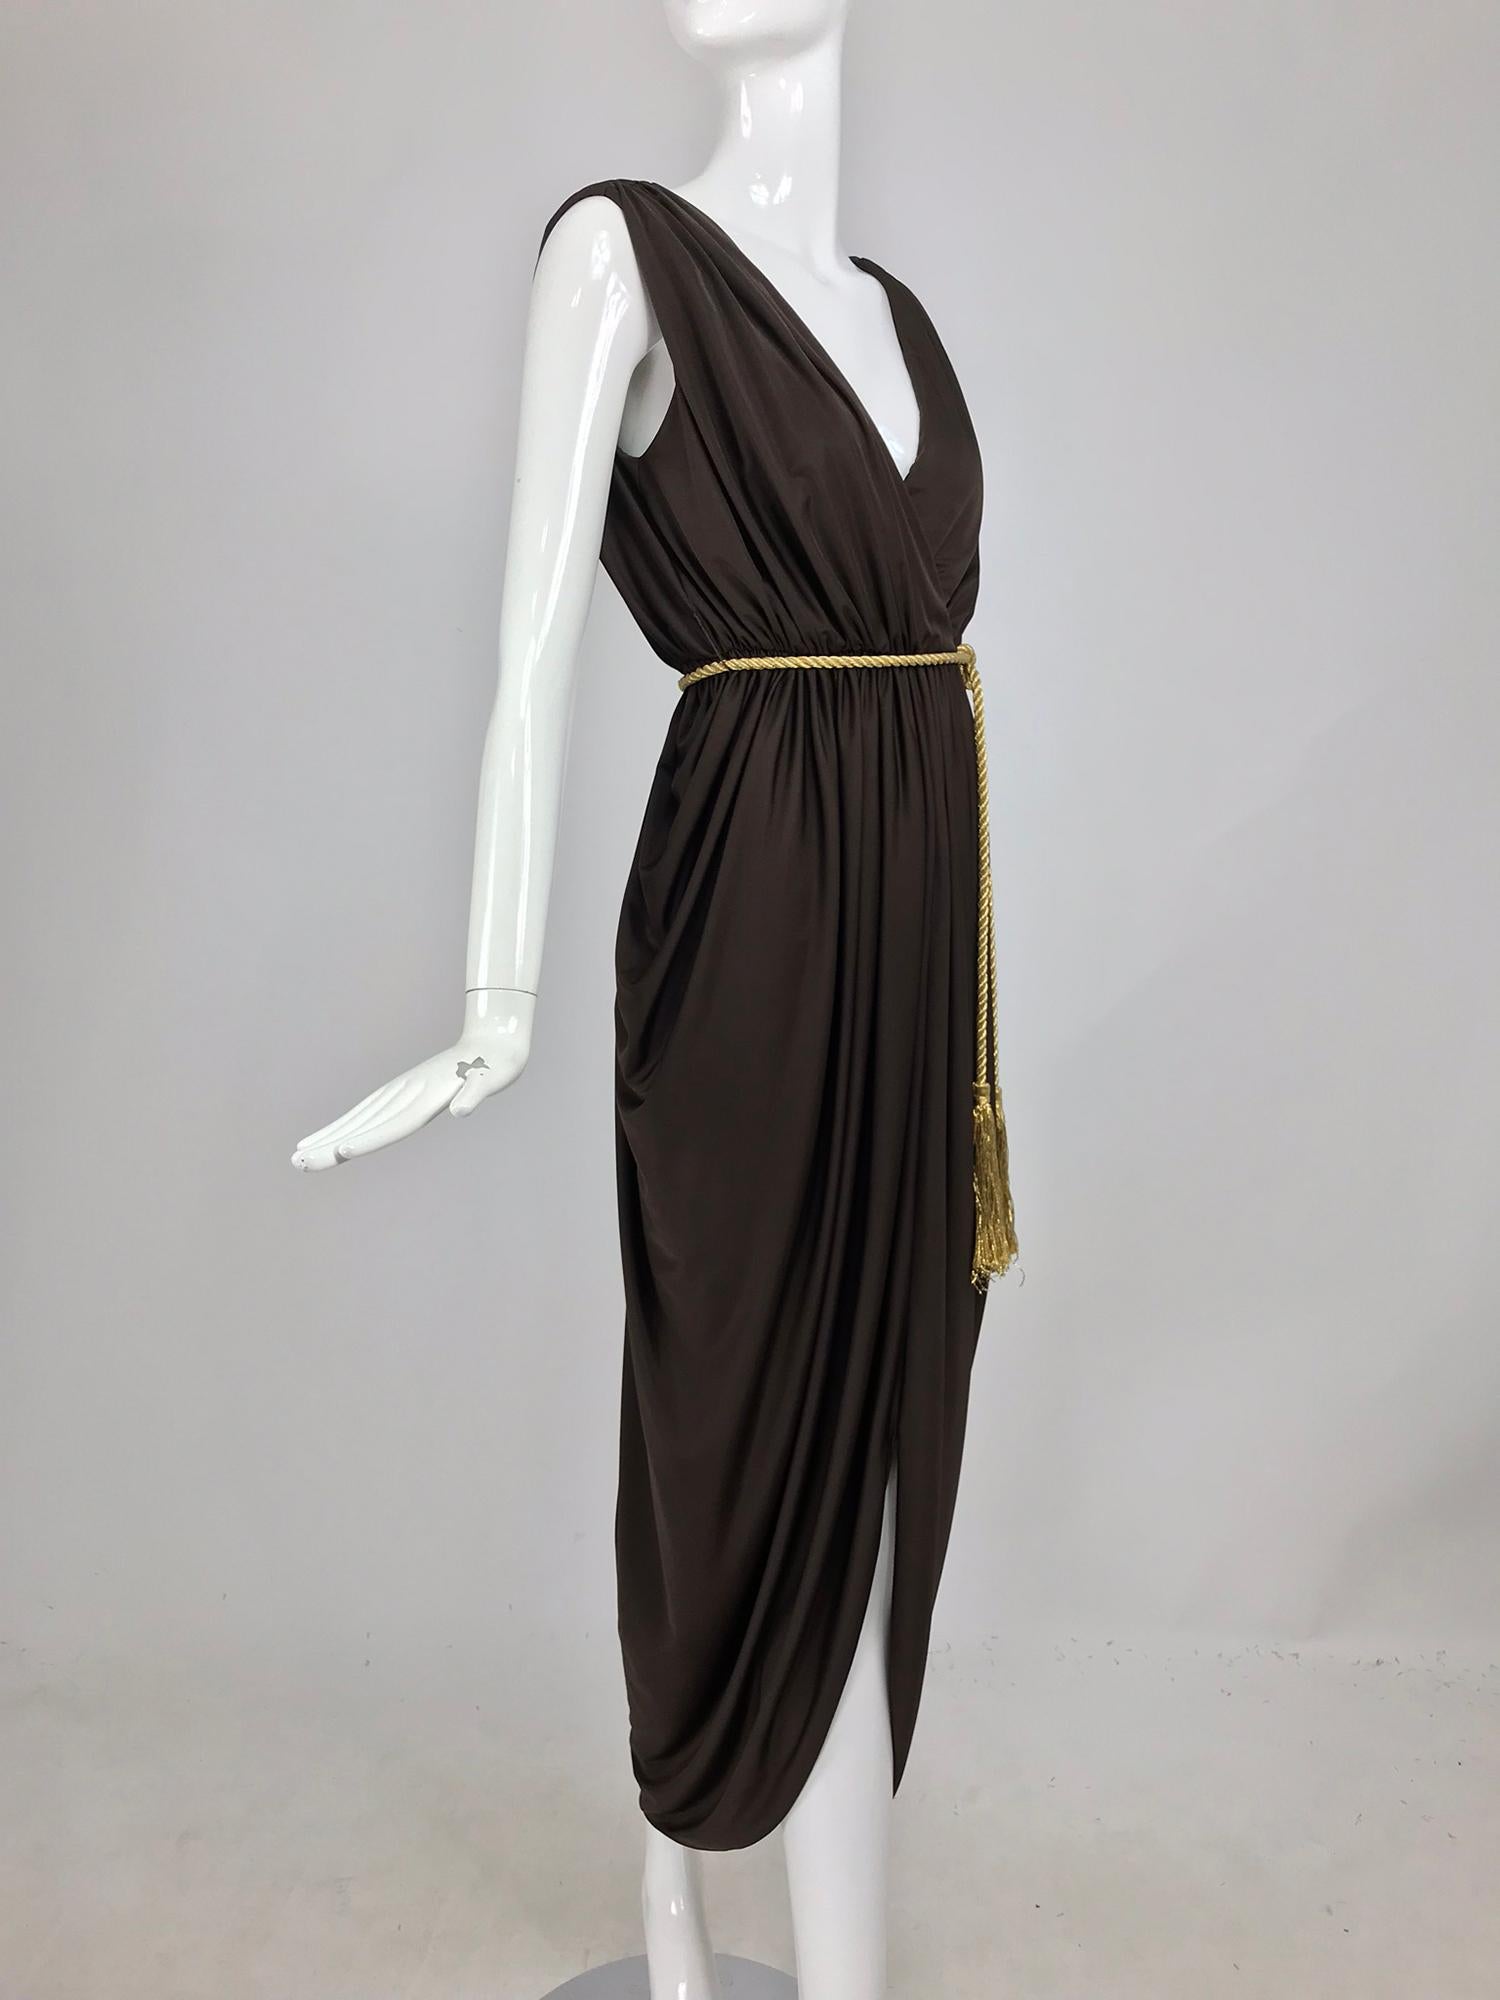 Marita by Anthony Muta plunge neck jersey petal hem maxi dress 1970s NWT. This is such a great dress and perfect for warm climates, travels well too. Silky chocolate brown jersey dress with deep front and back plunge, the dress is gathered at each